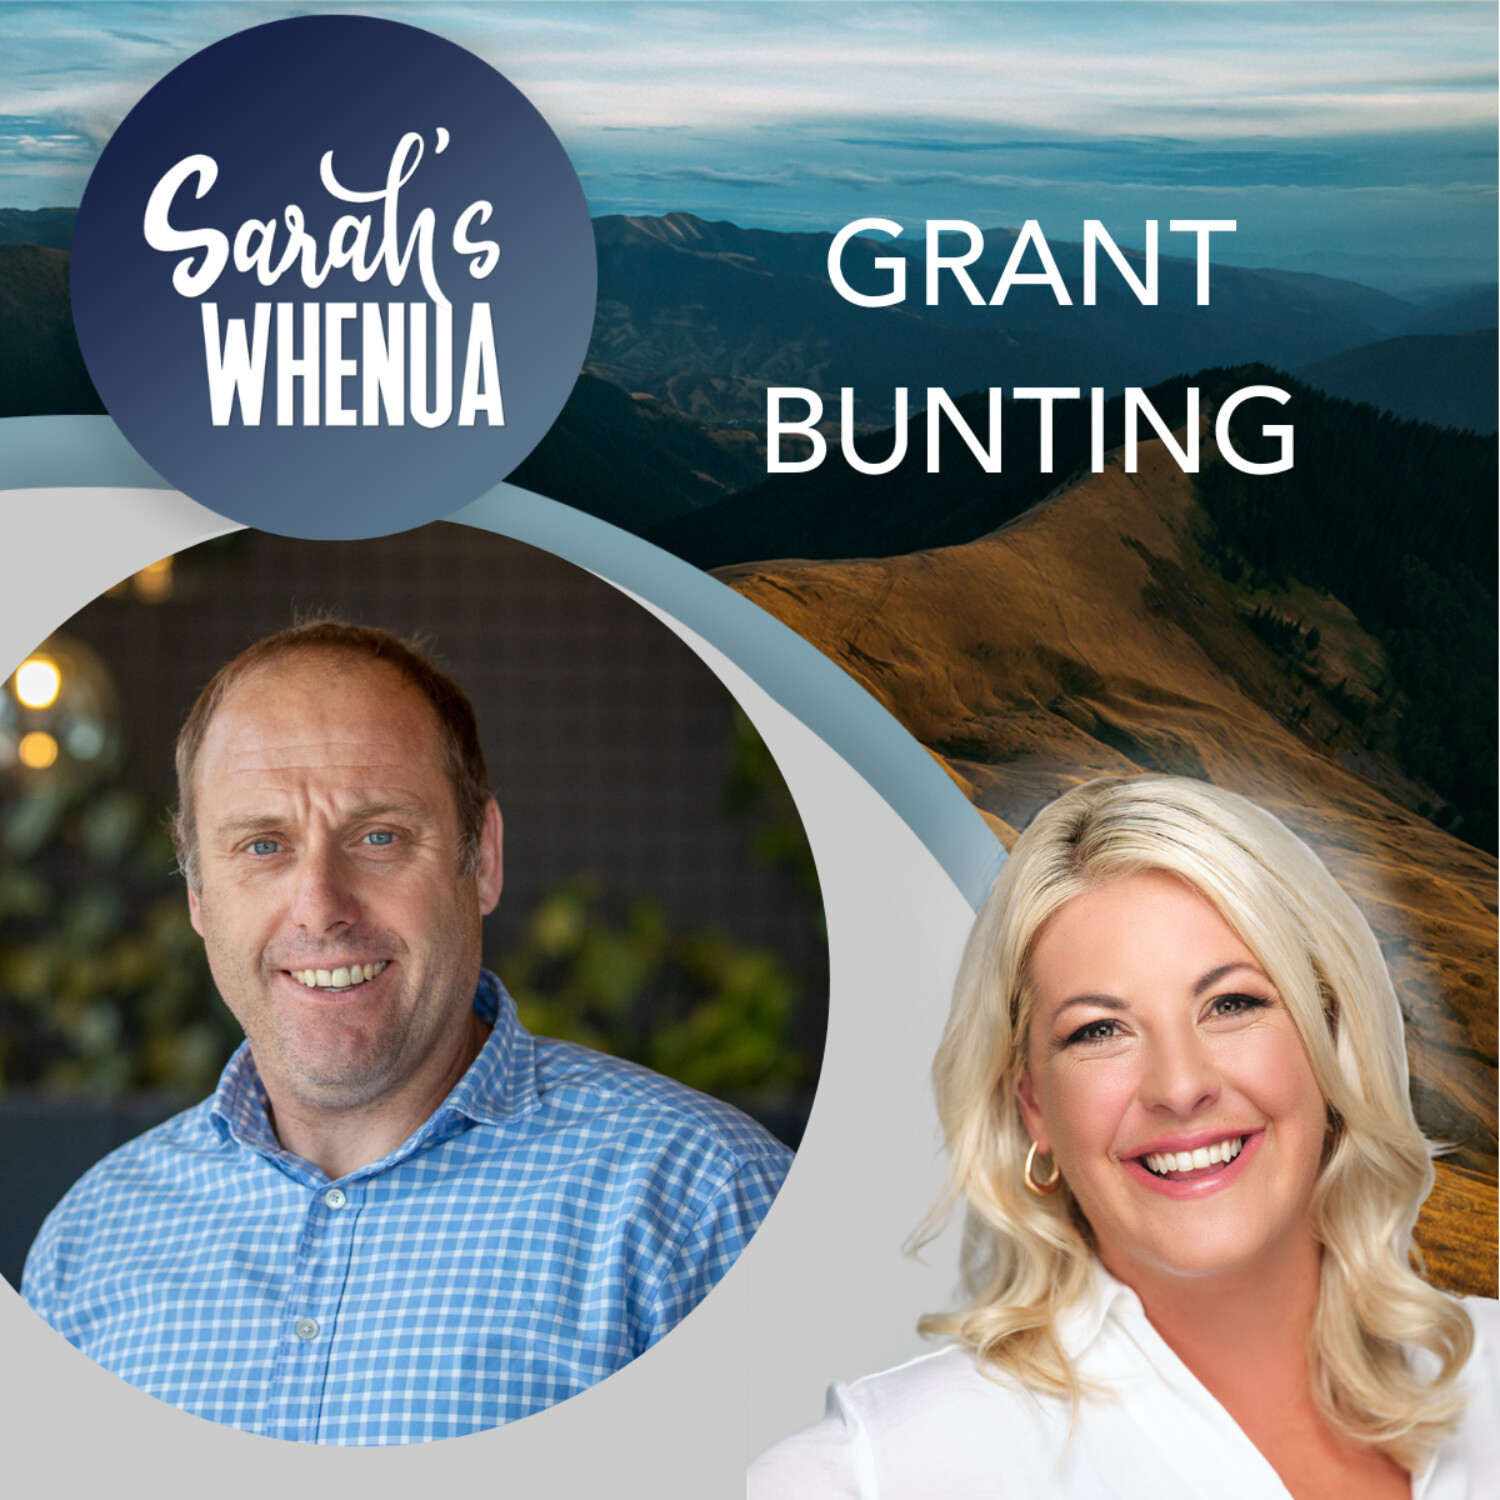 “Work together, industry told” with Grant Bunting